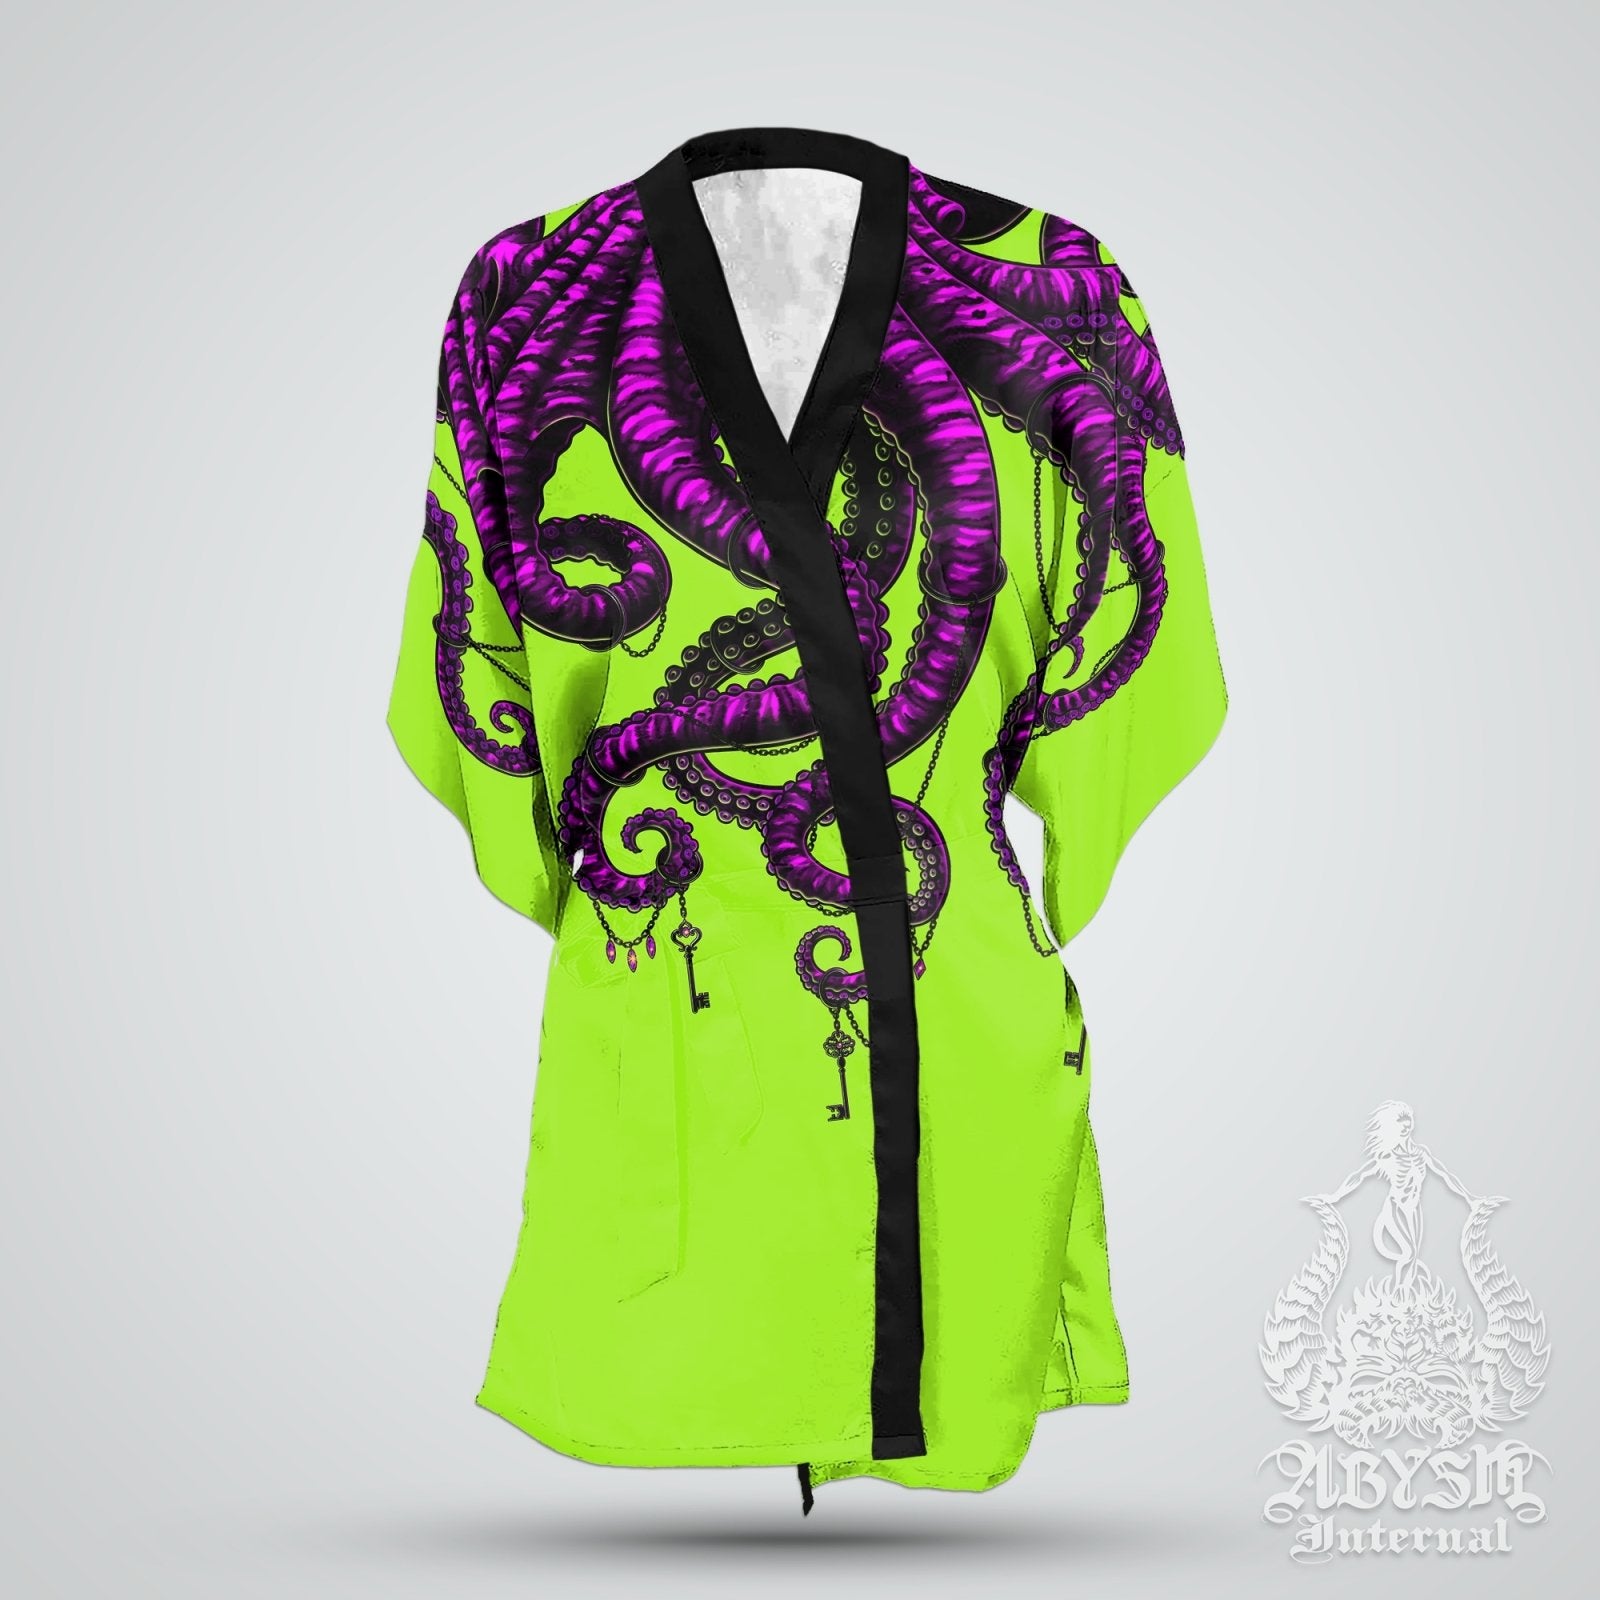 Beach Cover Up, Beach Outfit, Octopus Party Kimono, Summer Festival Robe, Indie and Alternative Clothing, Unisex - Neon Goth - Abysm Internal